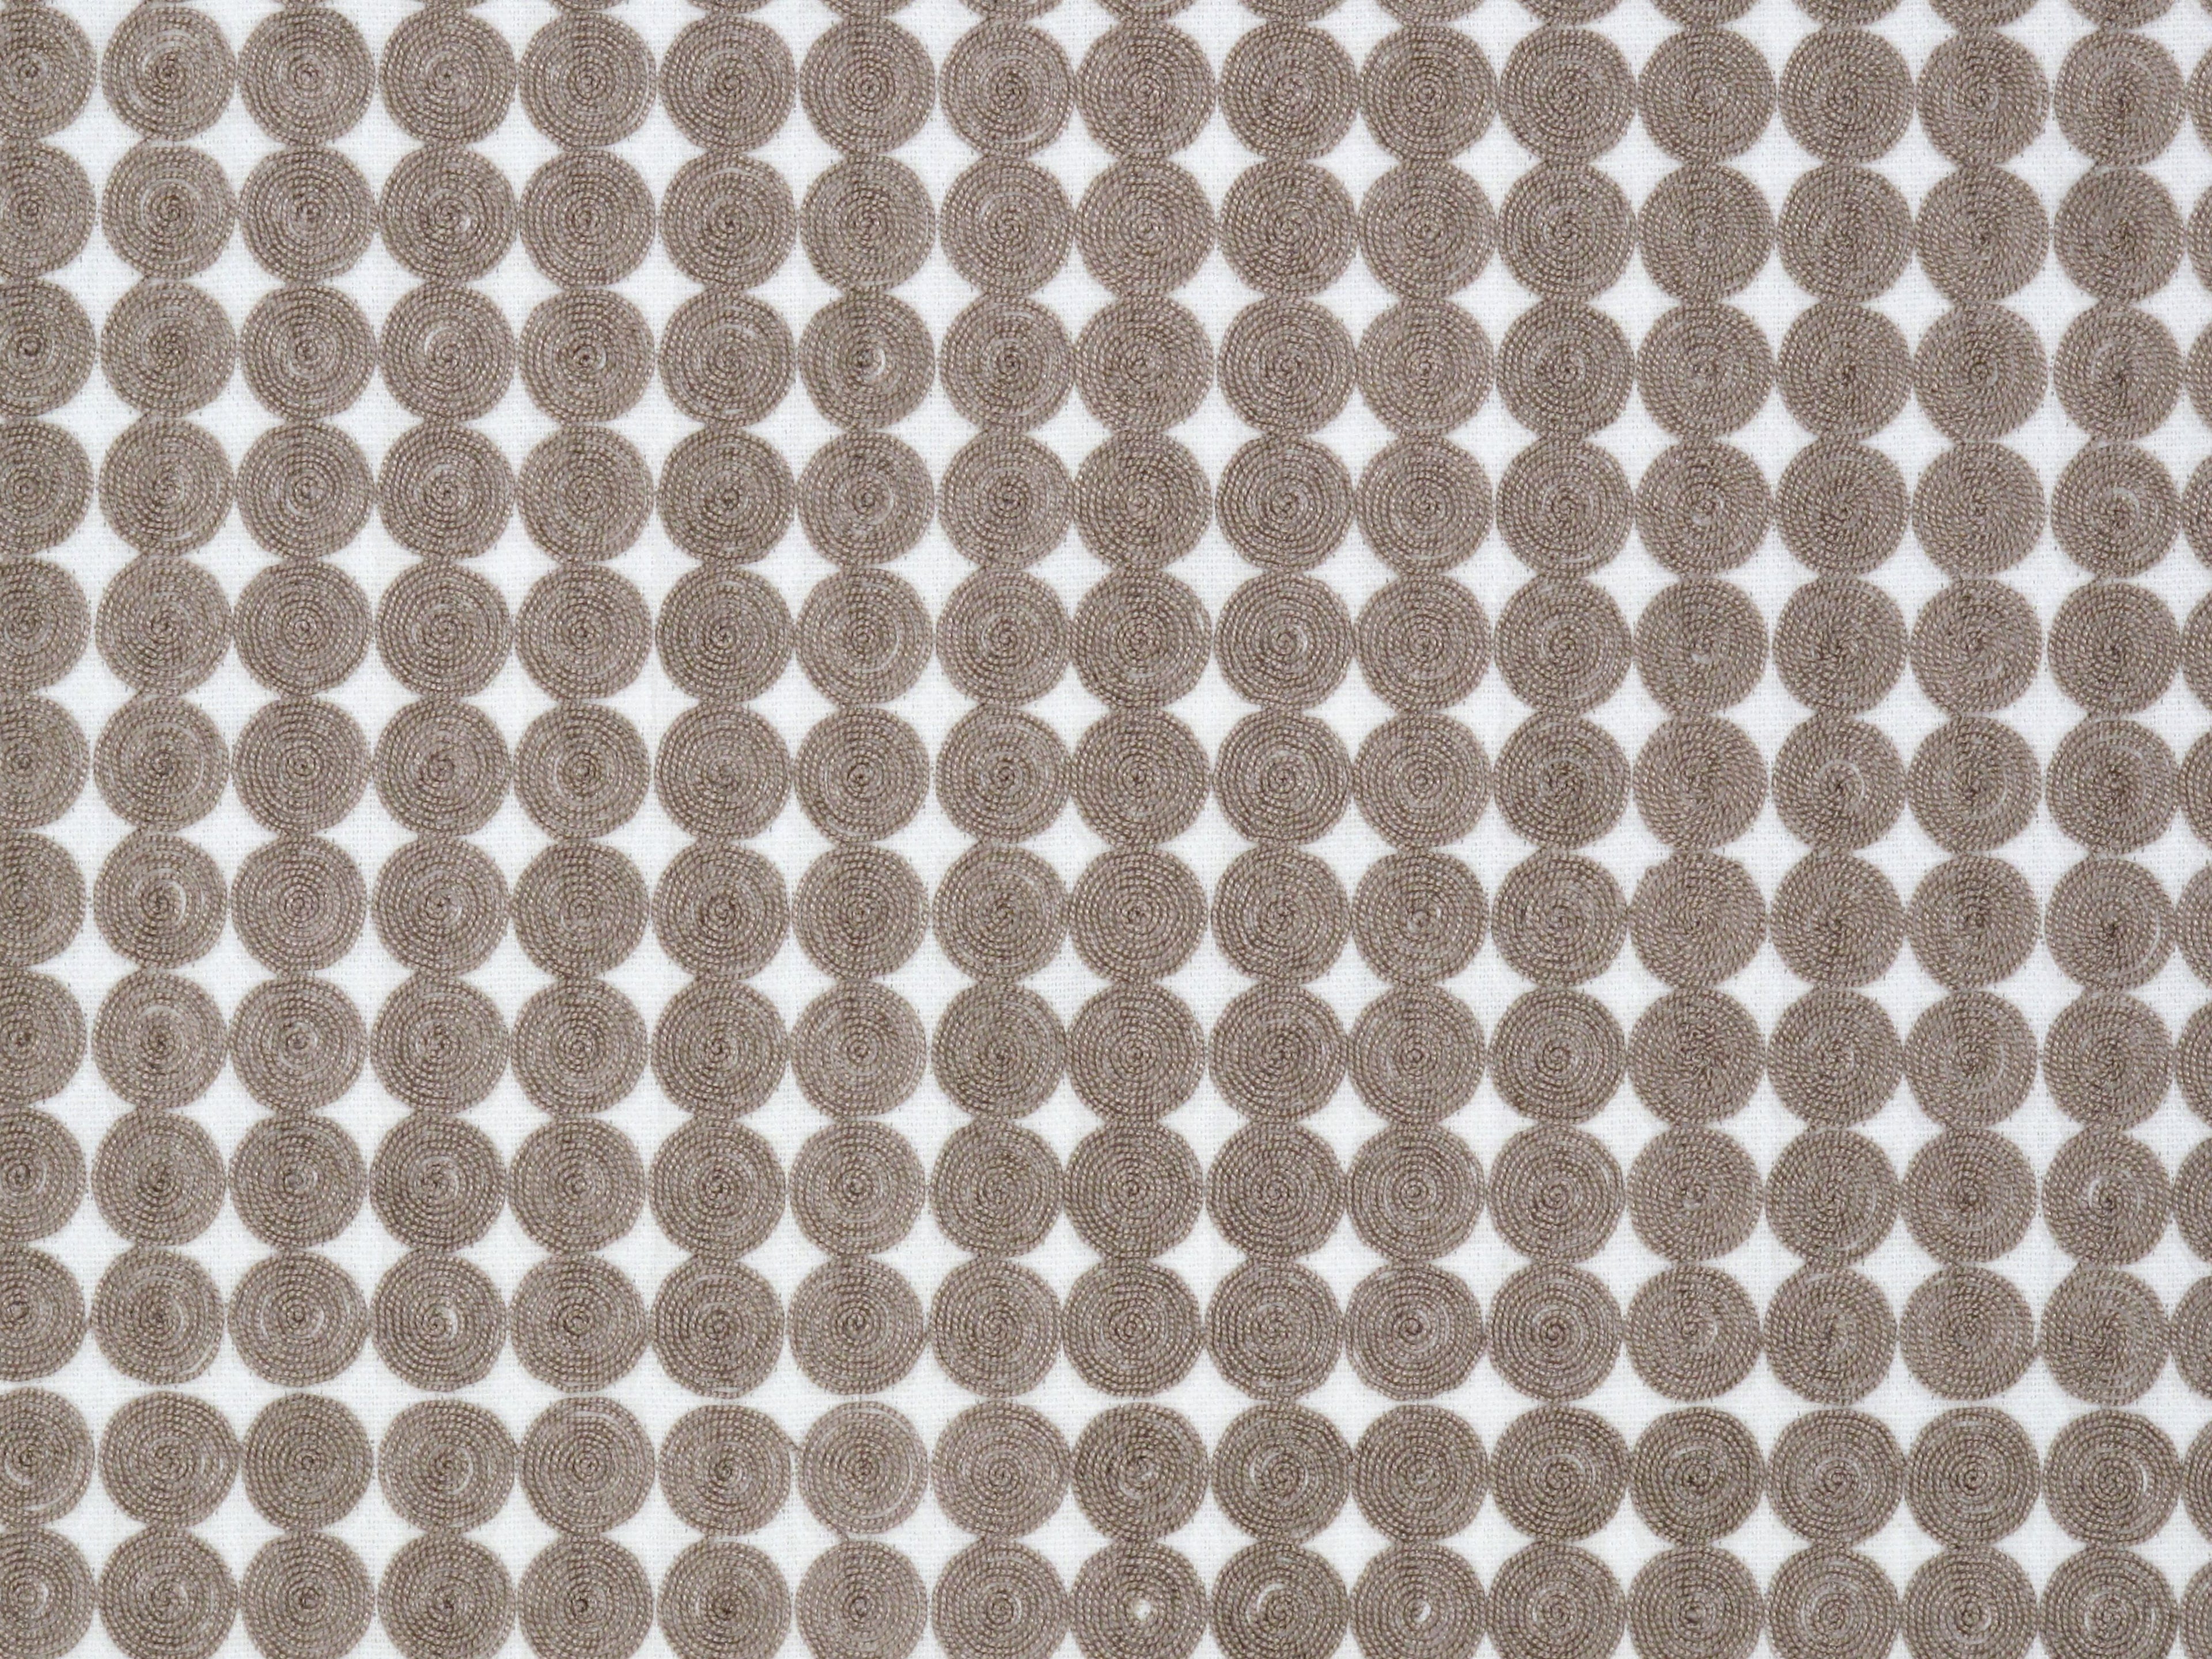 Labriz fabric in driftwood color - pattern number SI 00161720 - by Scalamandre in the Old World Weavers collection